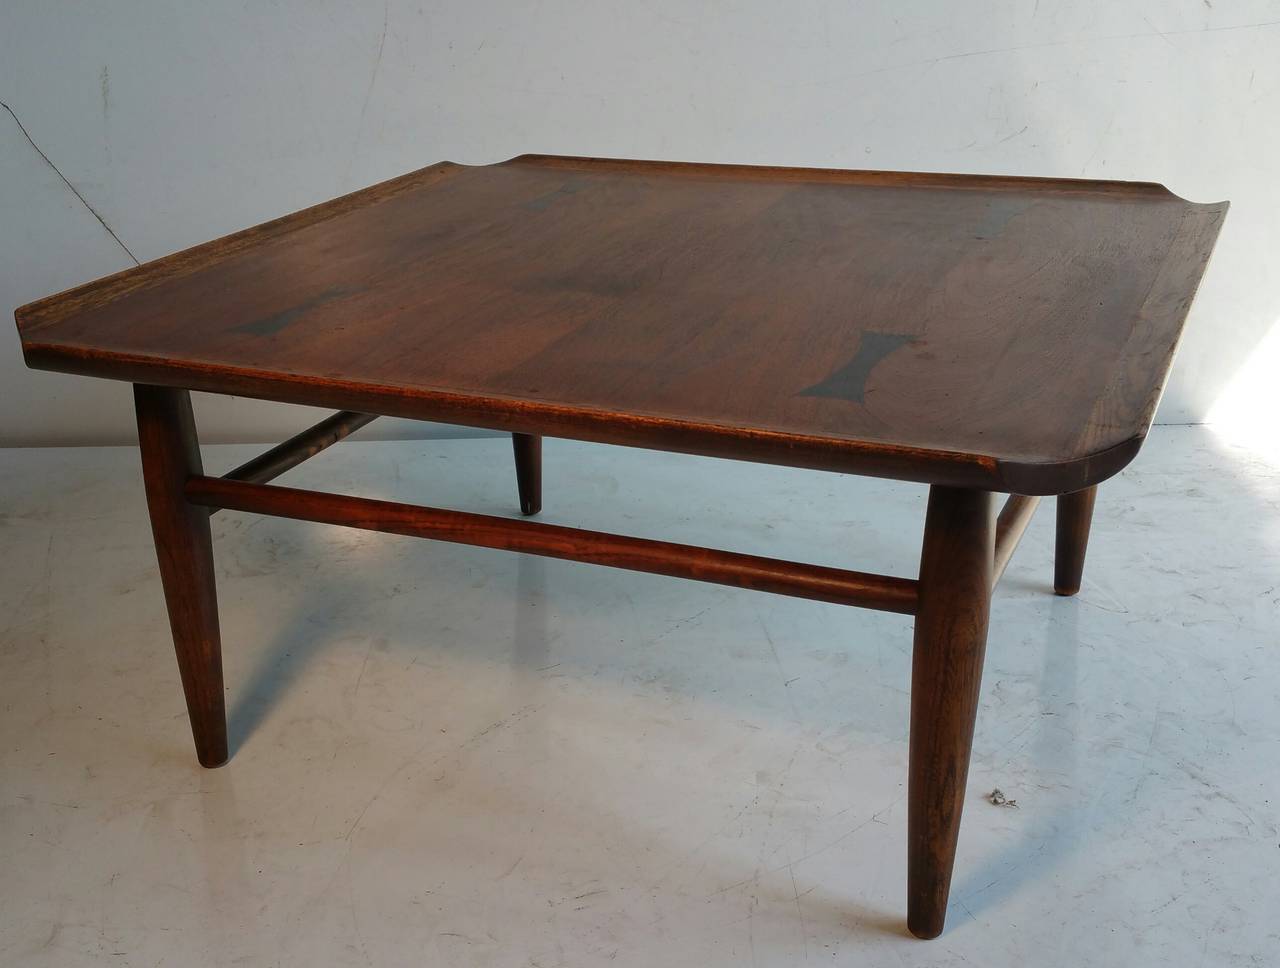 20th Century Mid-Century Modern Walnut, Ash and Rosewood Cocktail Table